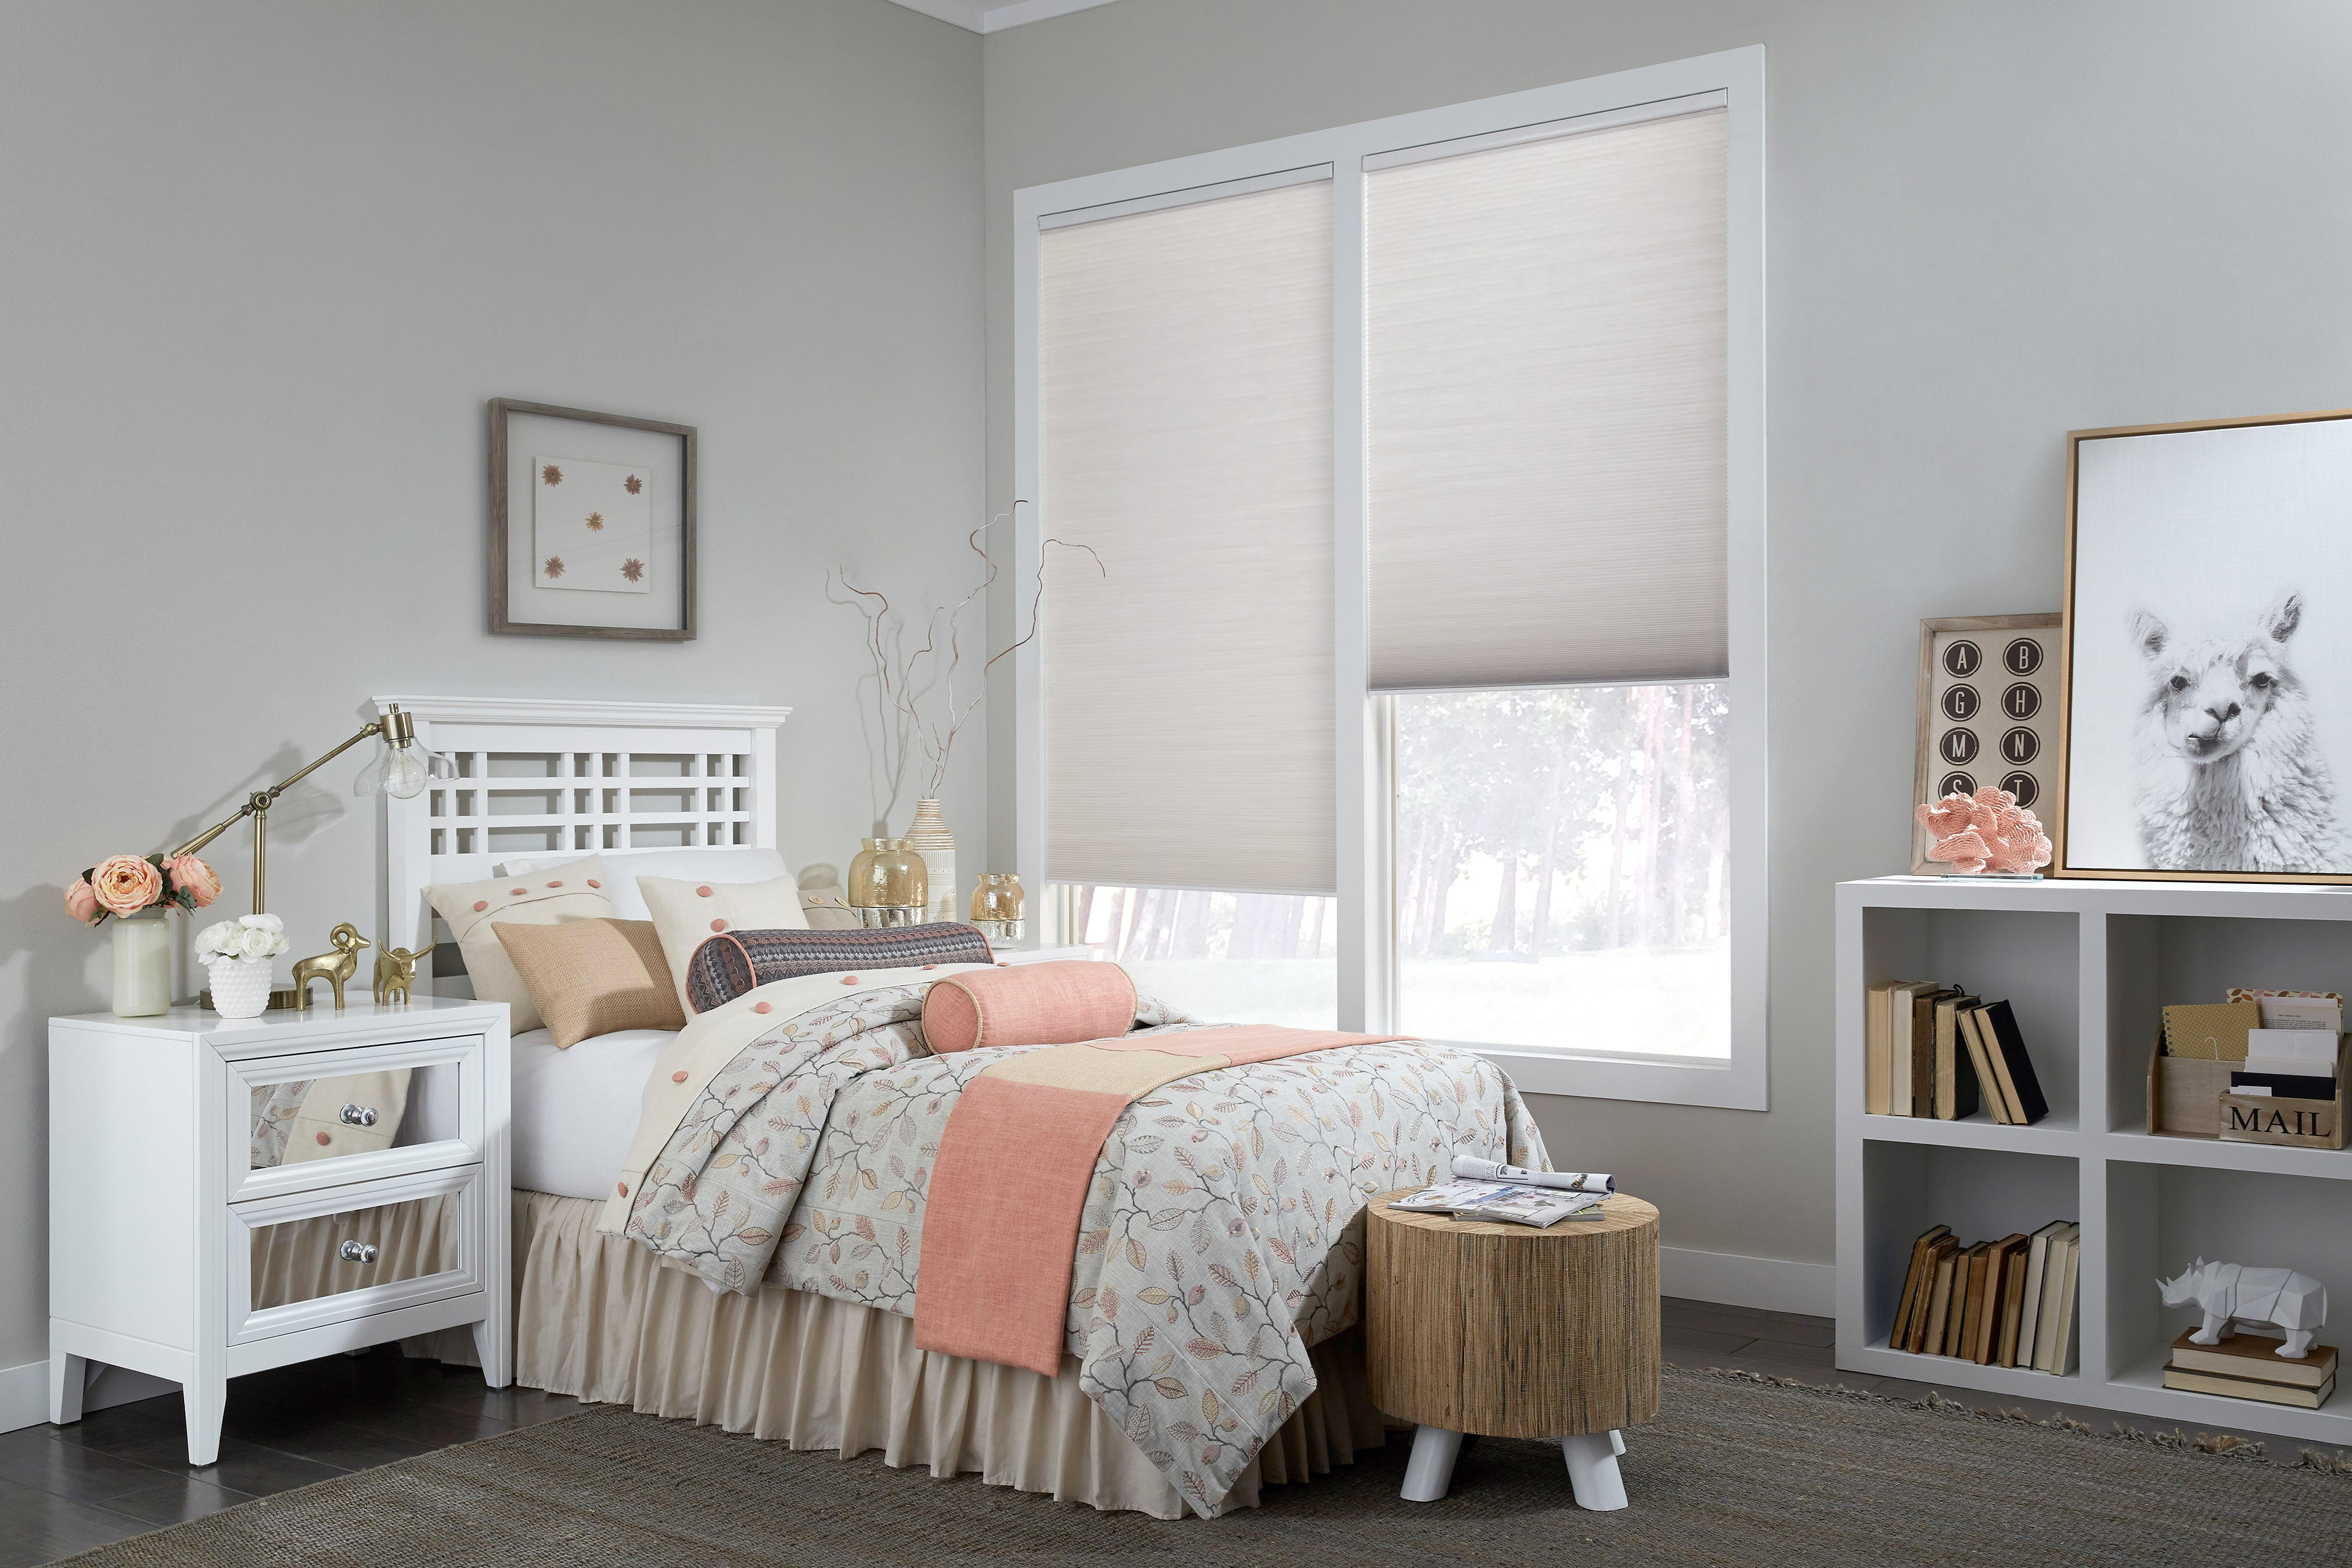 Energy Efficient Honeycomb Blinds Budget Blinds of South East Calgary Calgary (403)251-5515